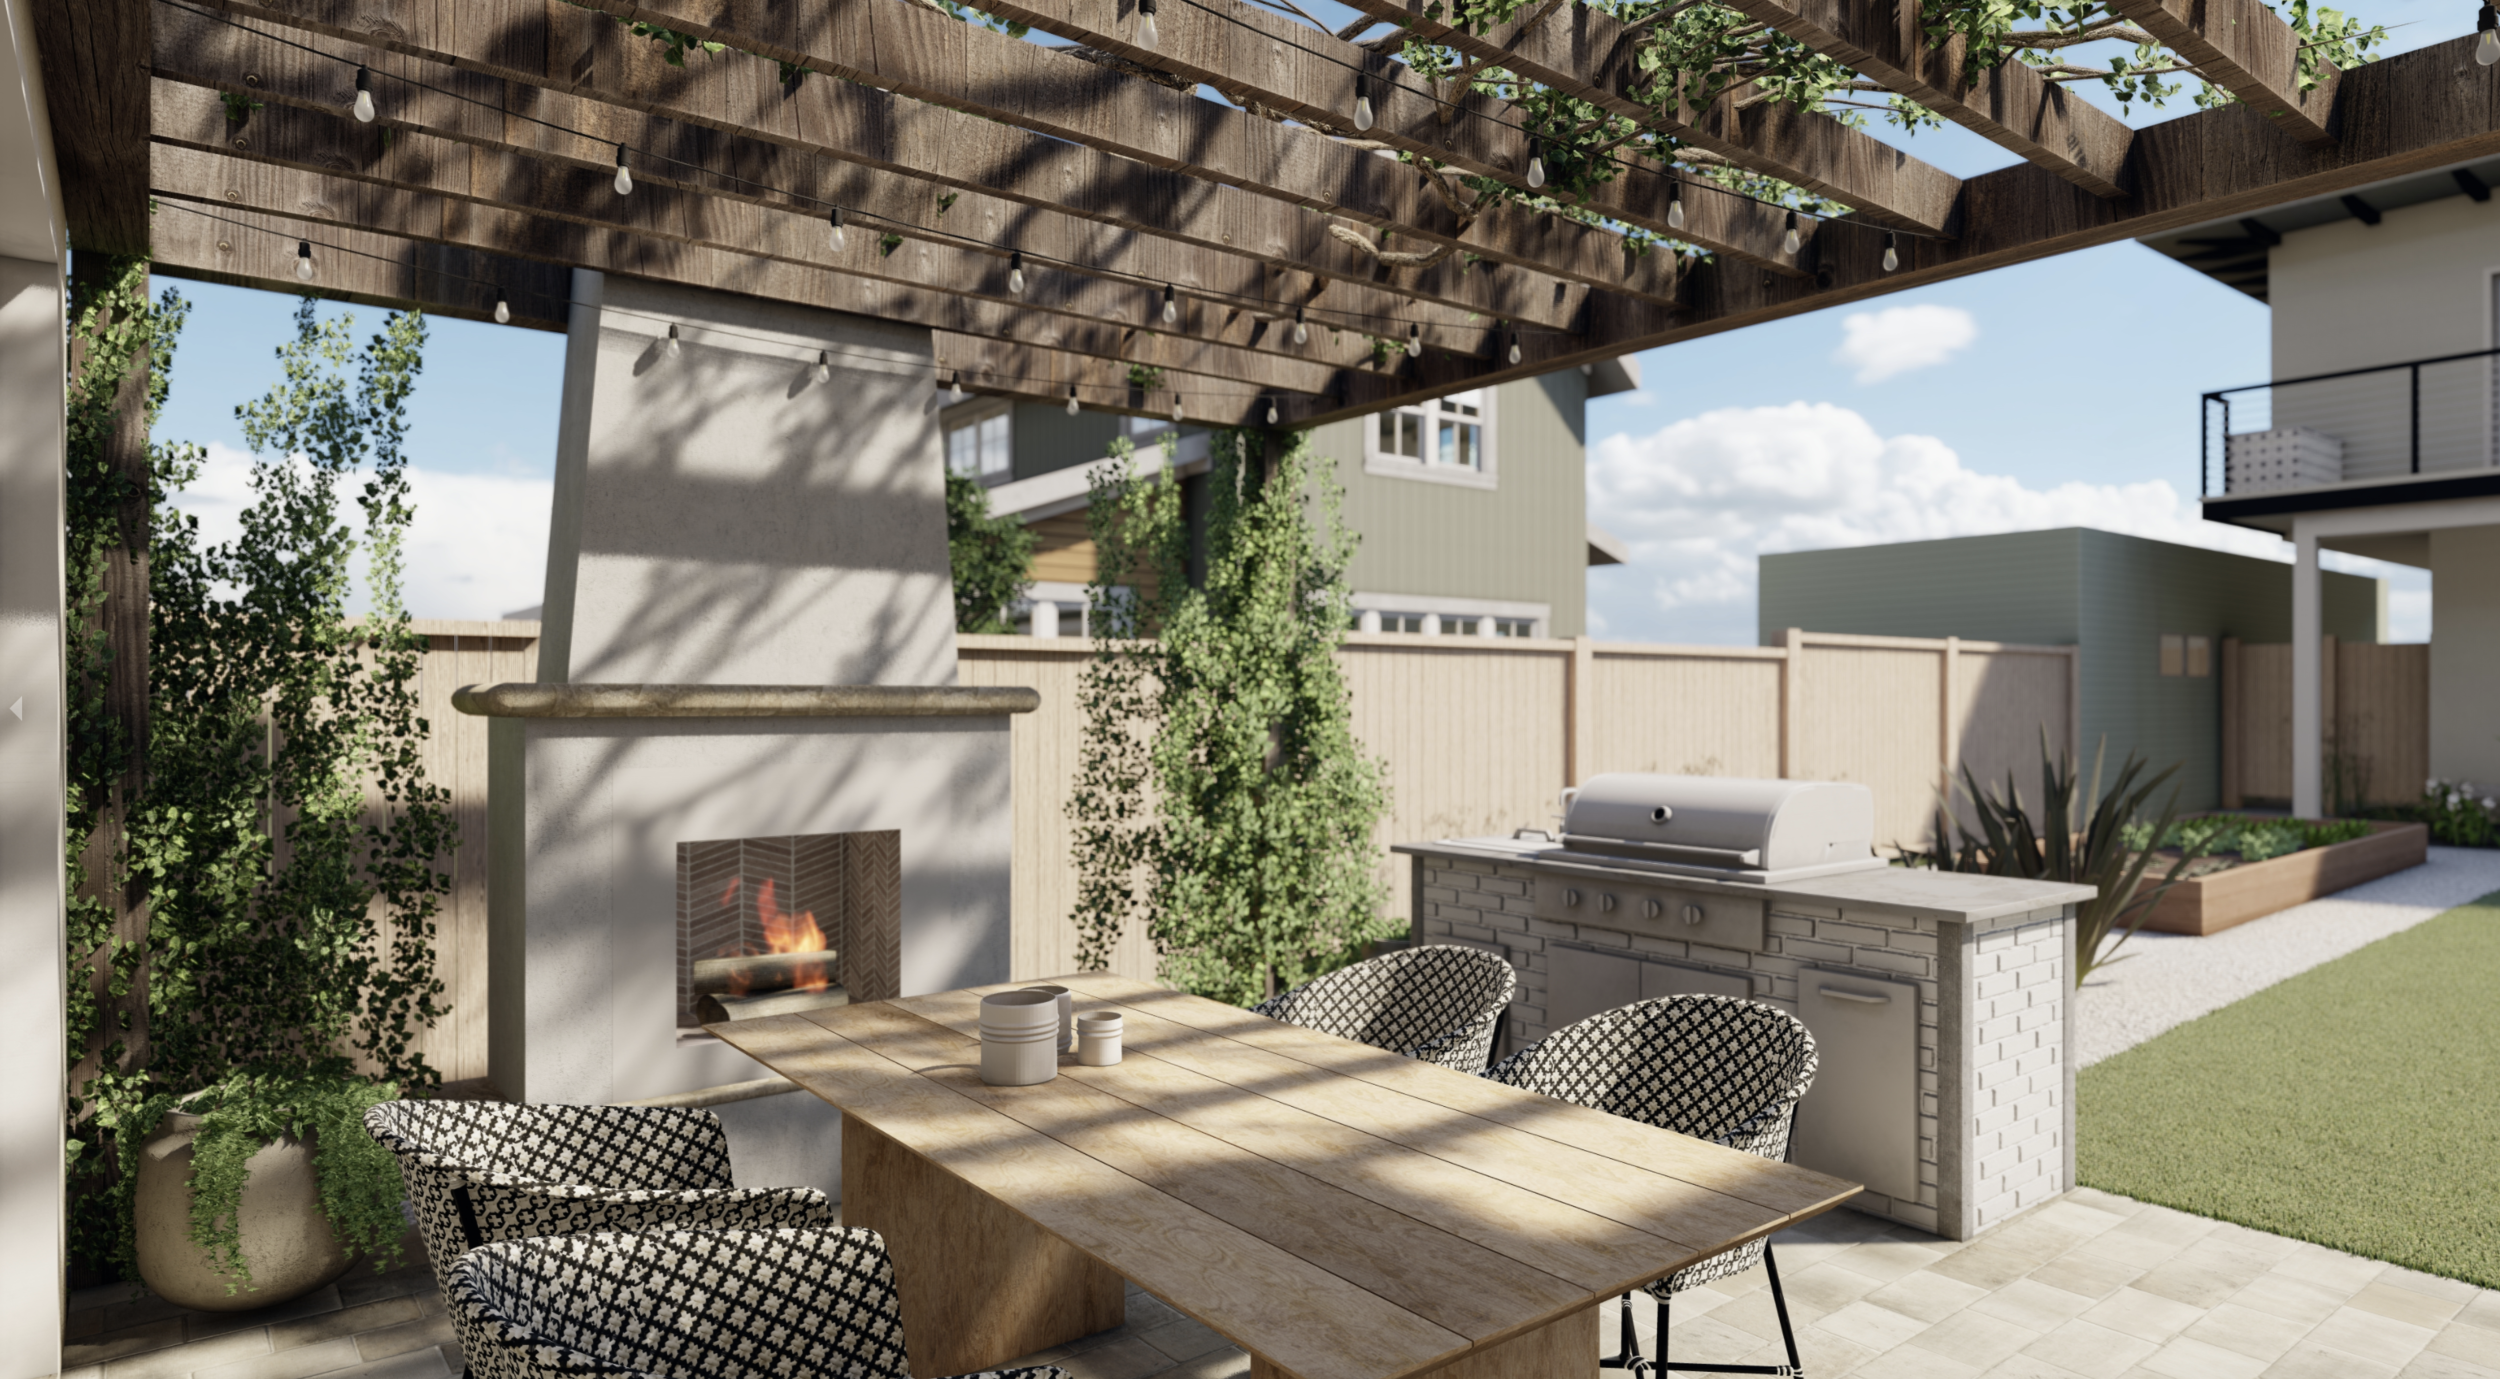 Outdoor kitchen and dining area with fireplace in San Diego, CA landscape design